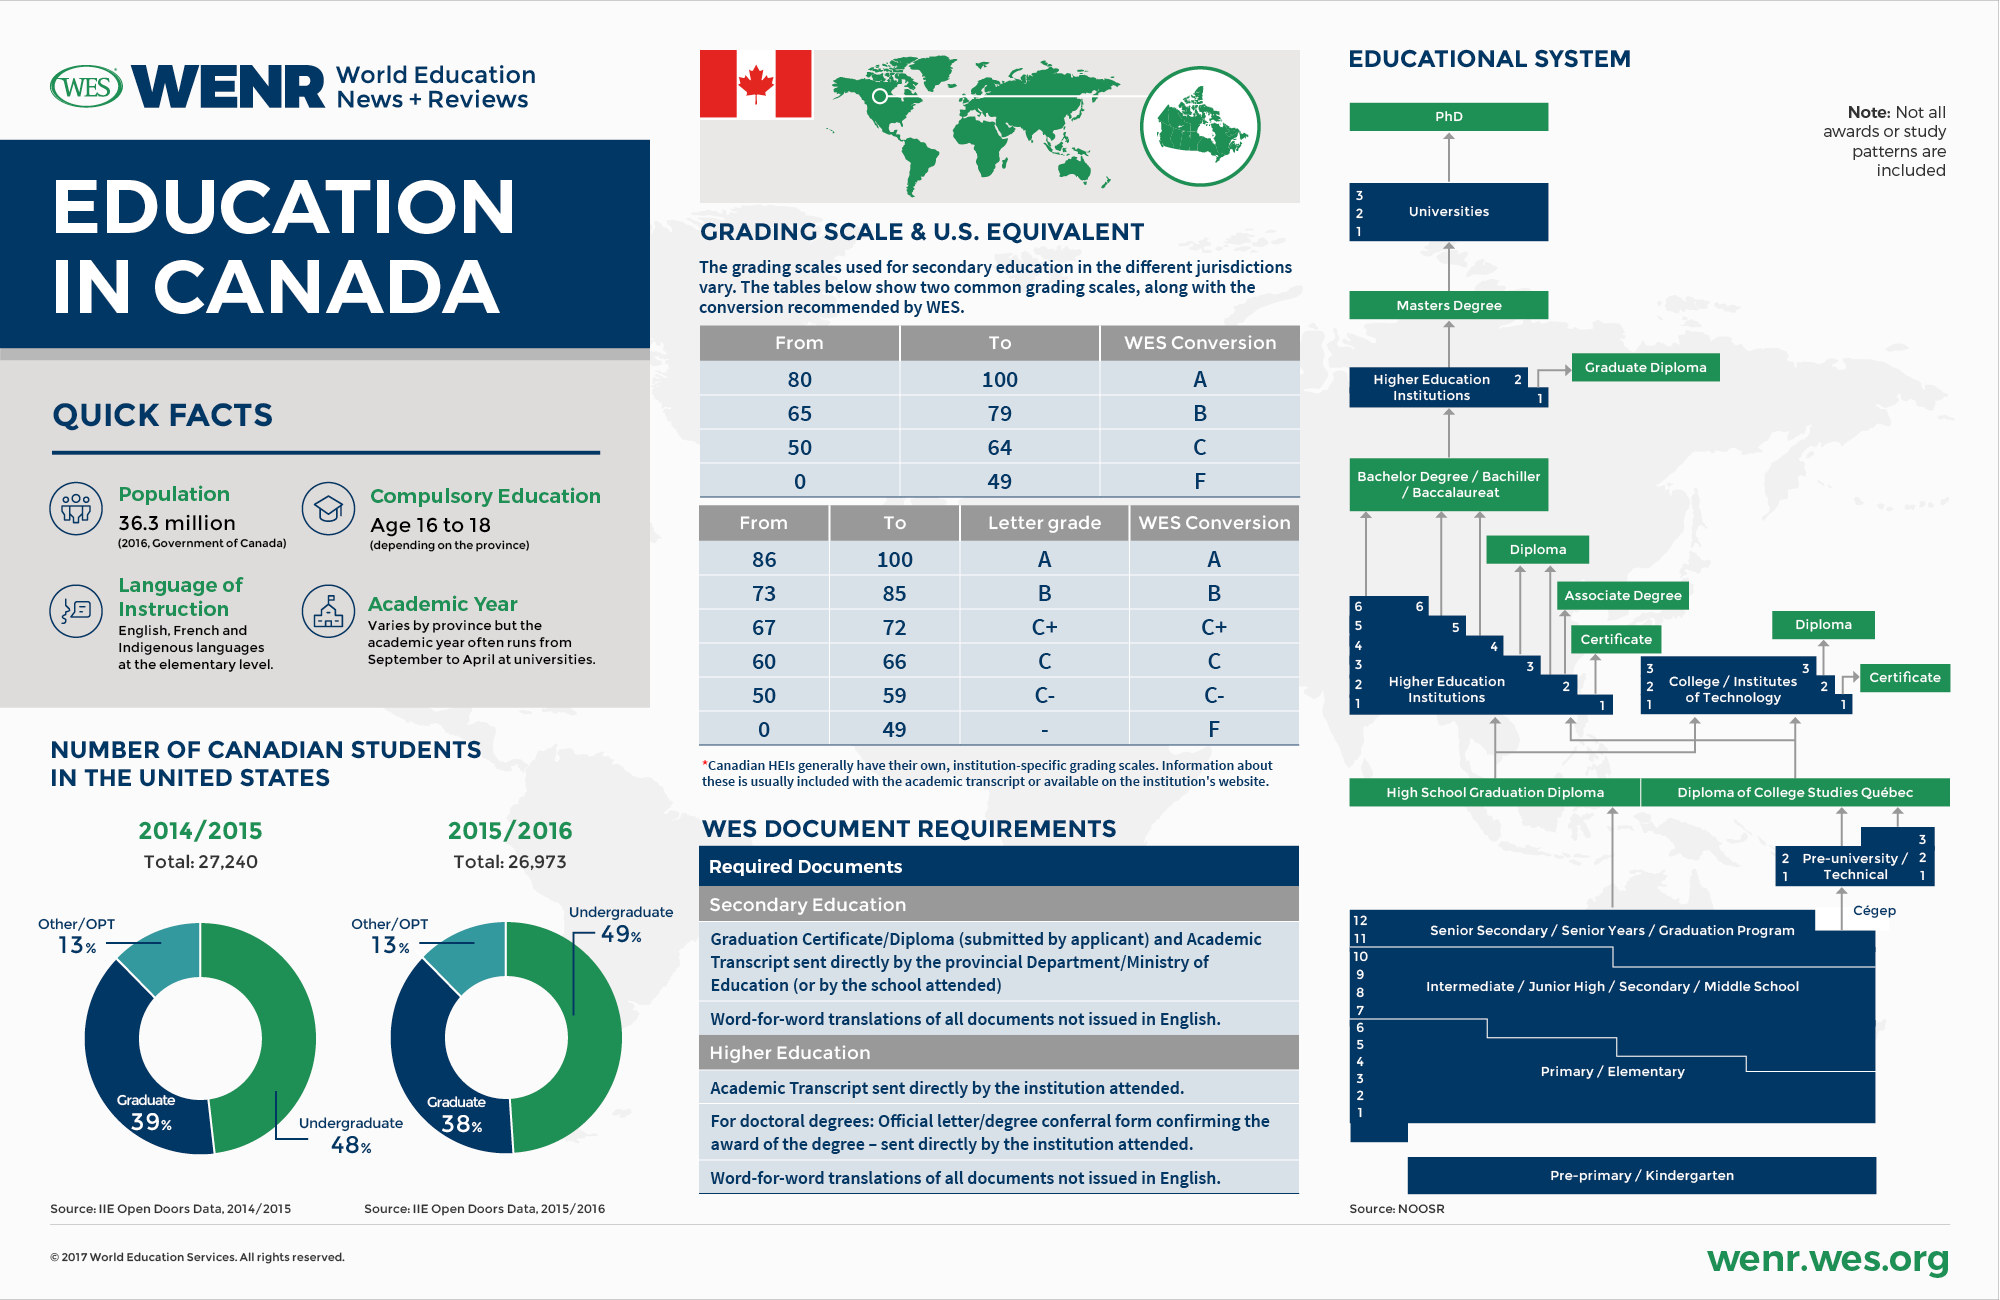 An infographic showing fast facts about Canada's educational system and international student mobility landscape. 